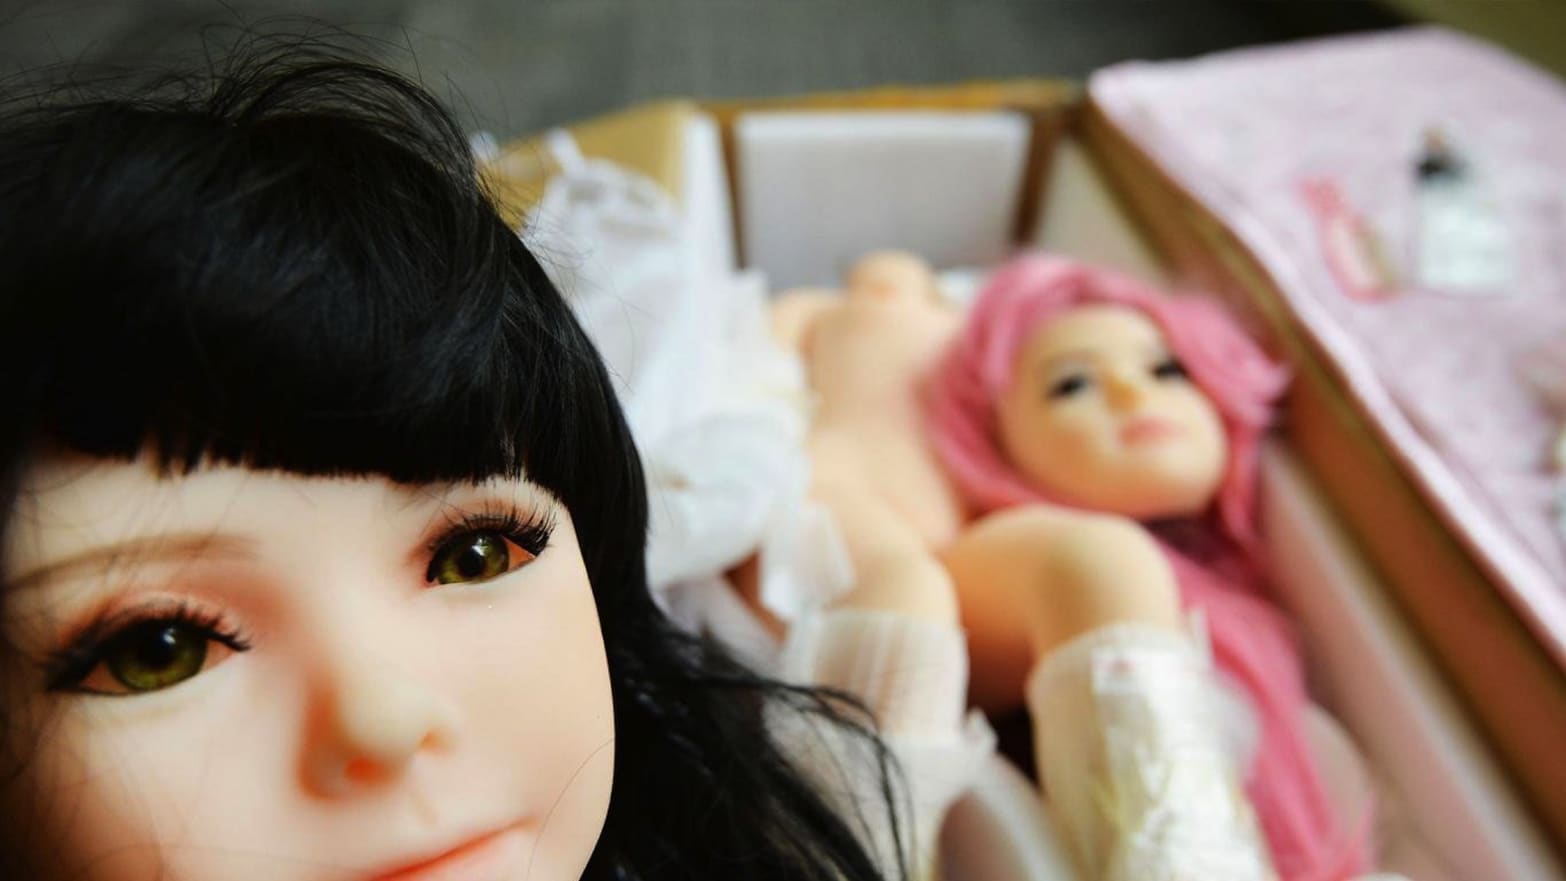 Small Baby Sex - Child Sex Robots Are Coming to America. Can We Stop Them ...